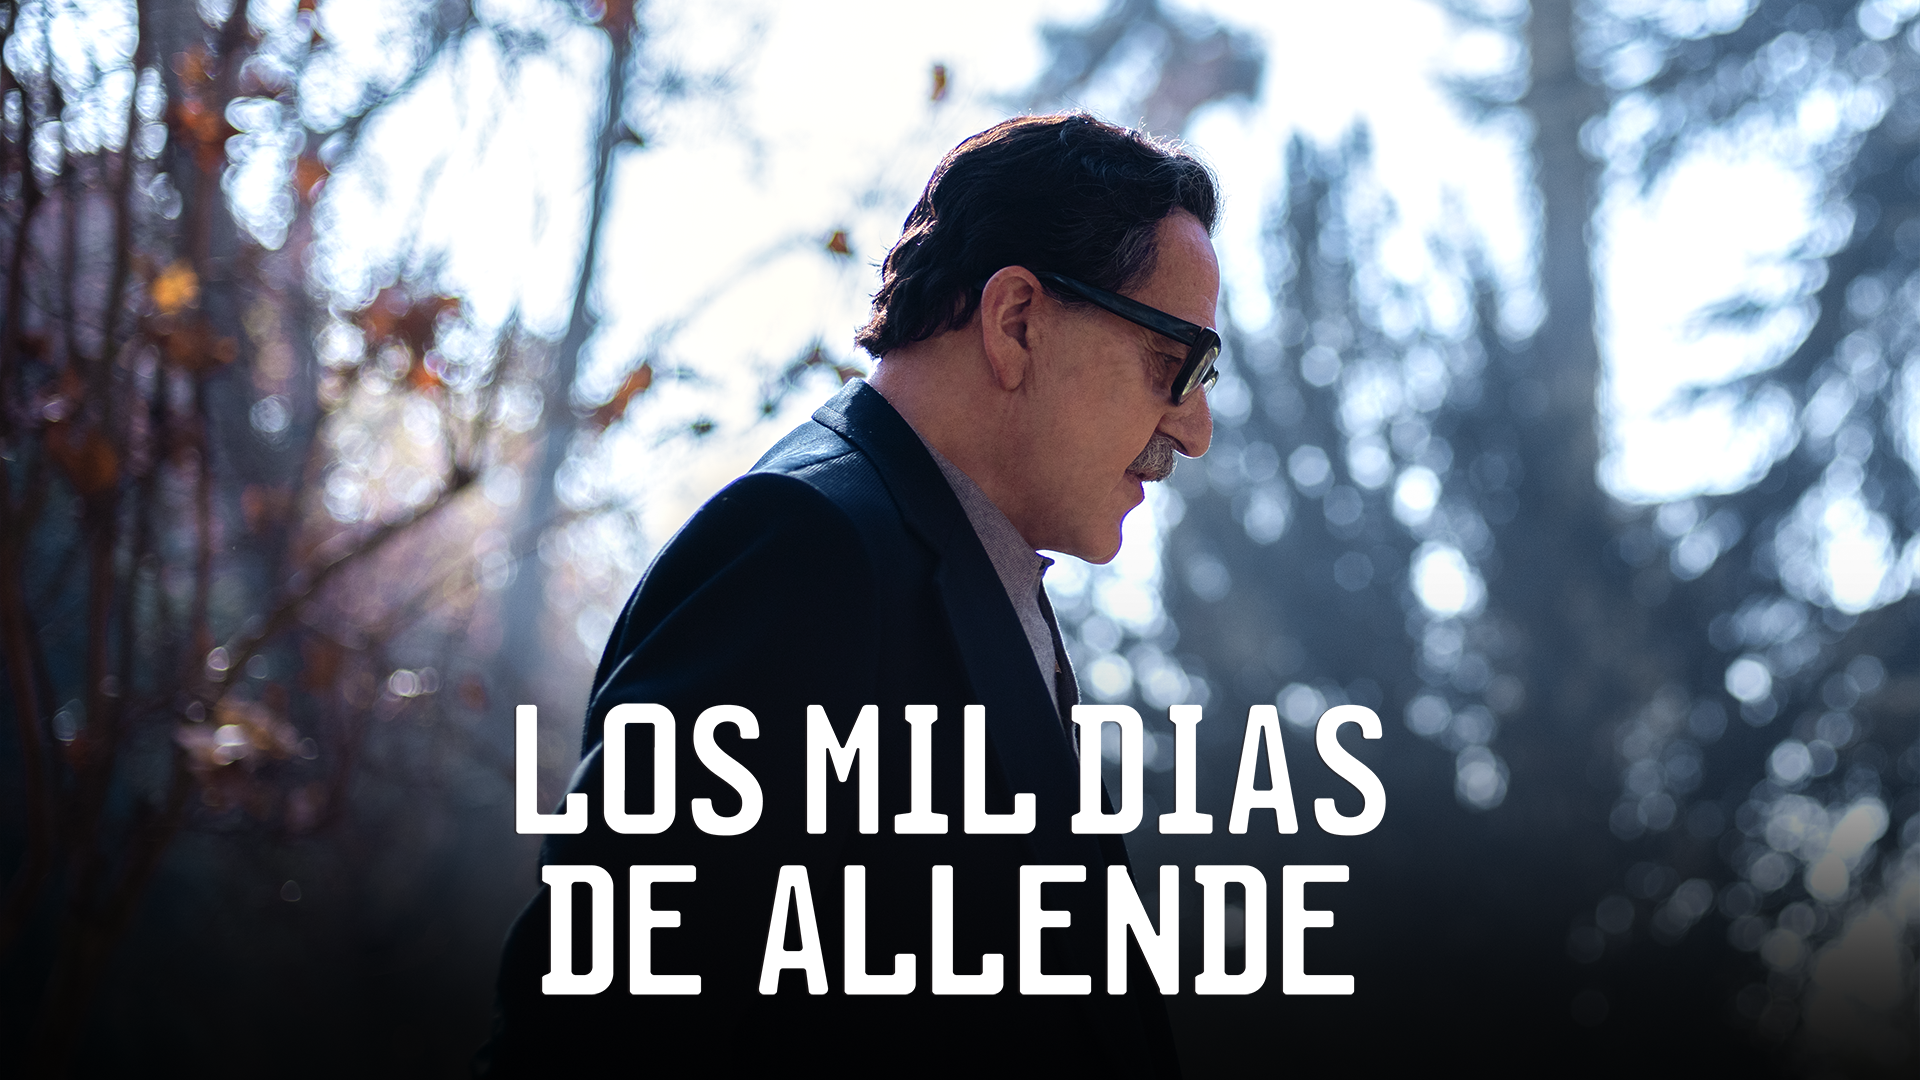 The thousand days of Allende